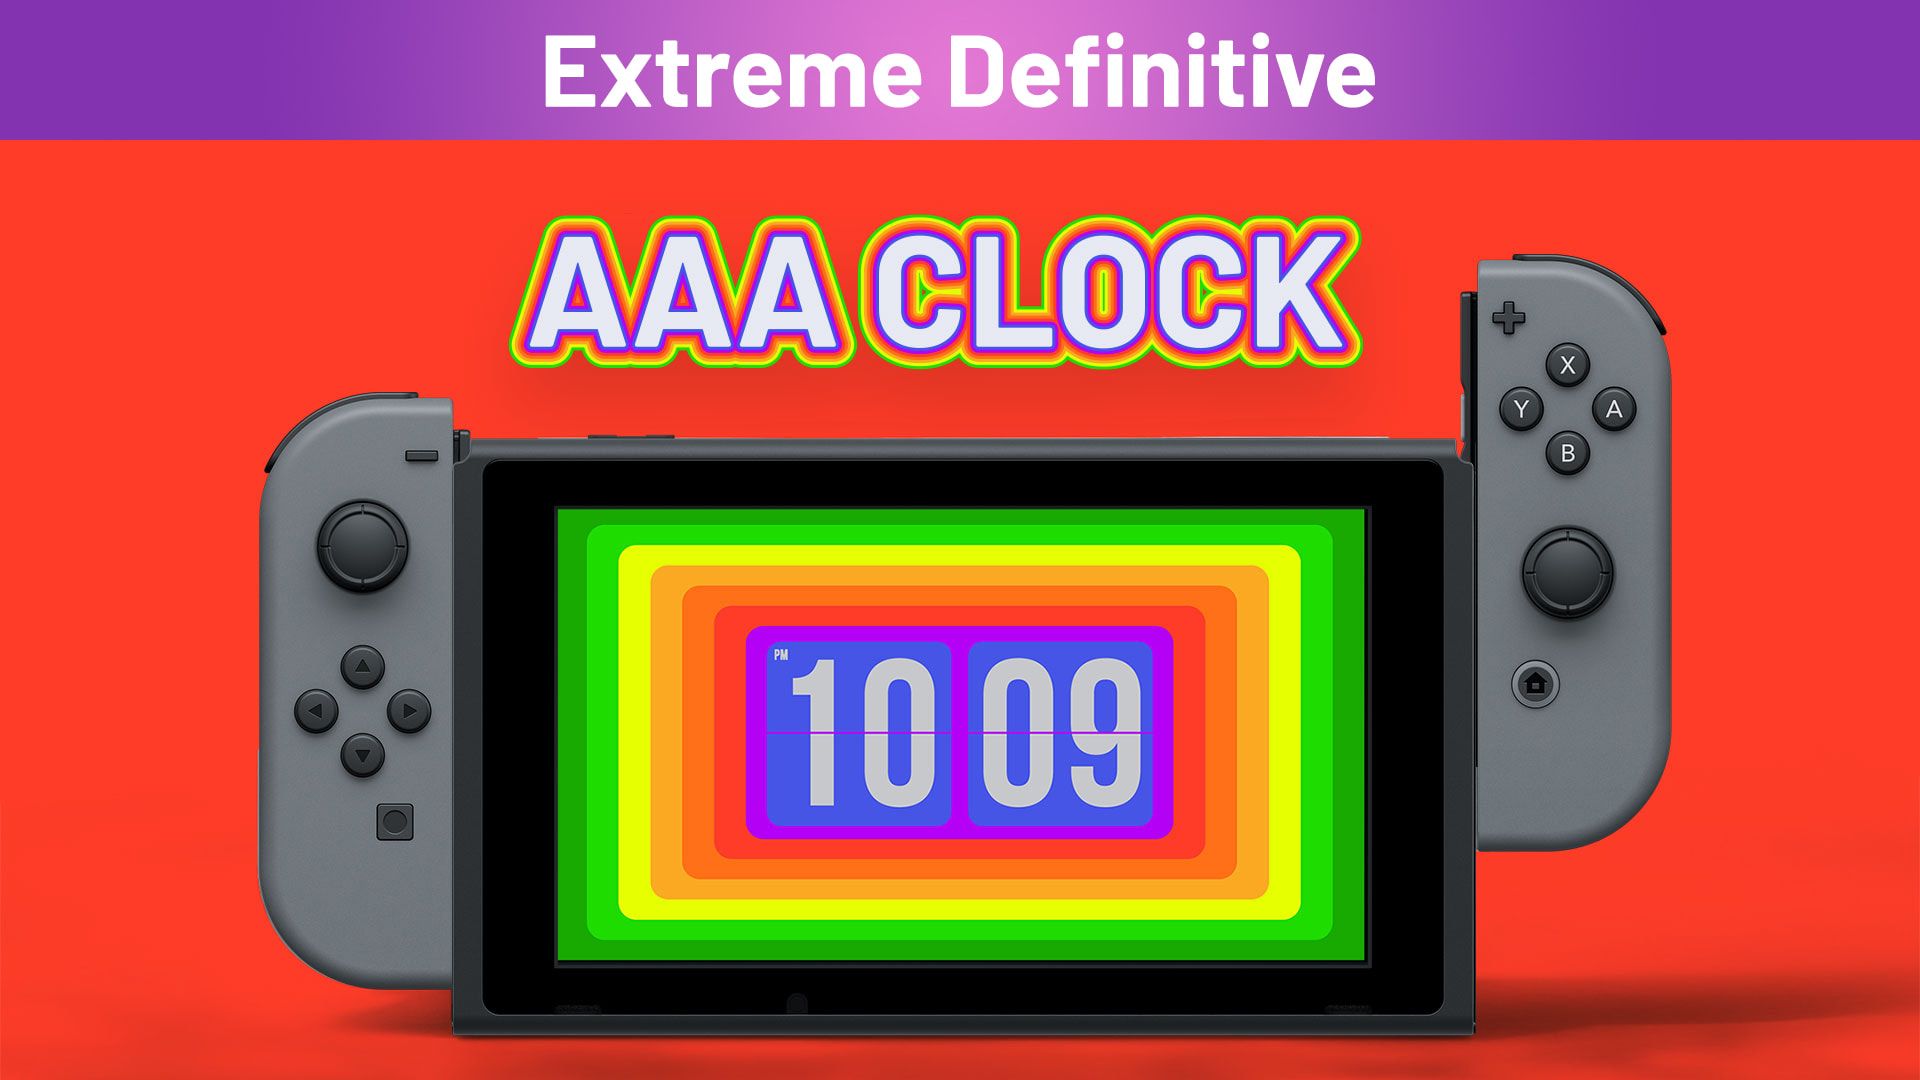 AAA Clock Extreme Definitive